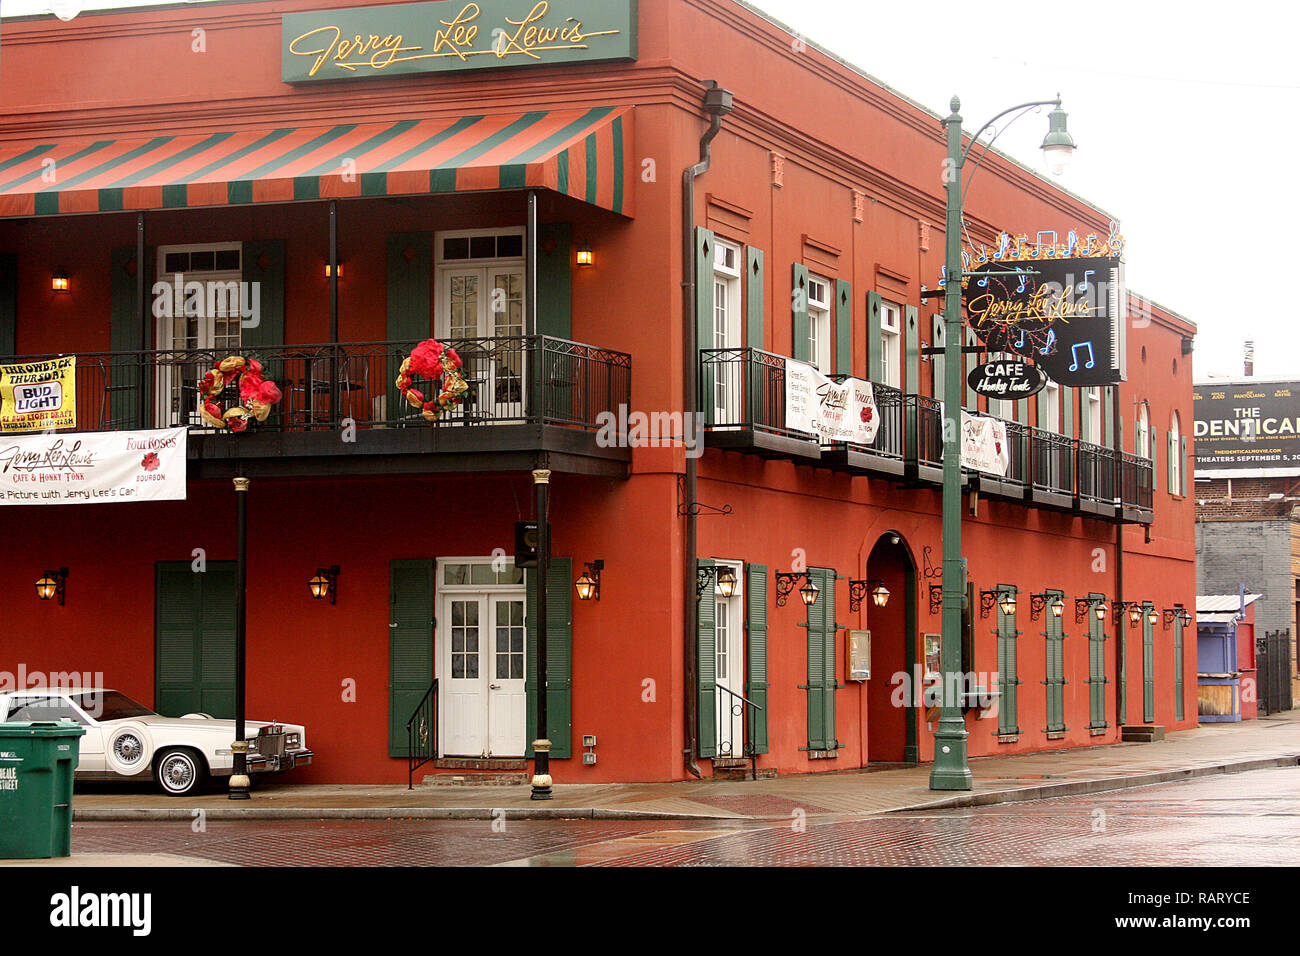 Jerry Lee Lewis' Cafe & Honky Tonk restaurant in Memphis, TN, USA Stock  Photo - Alamy